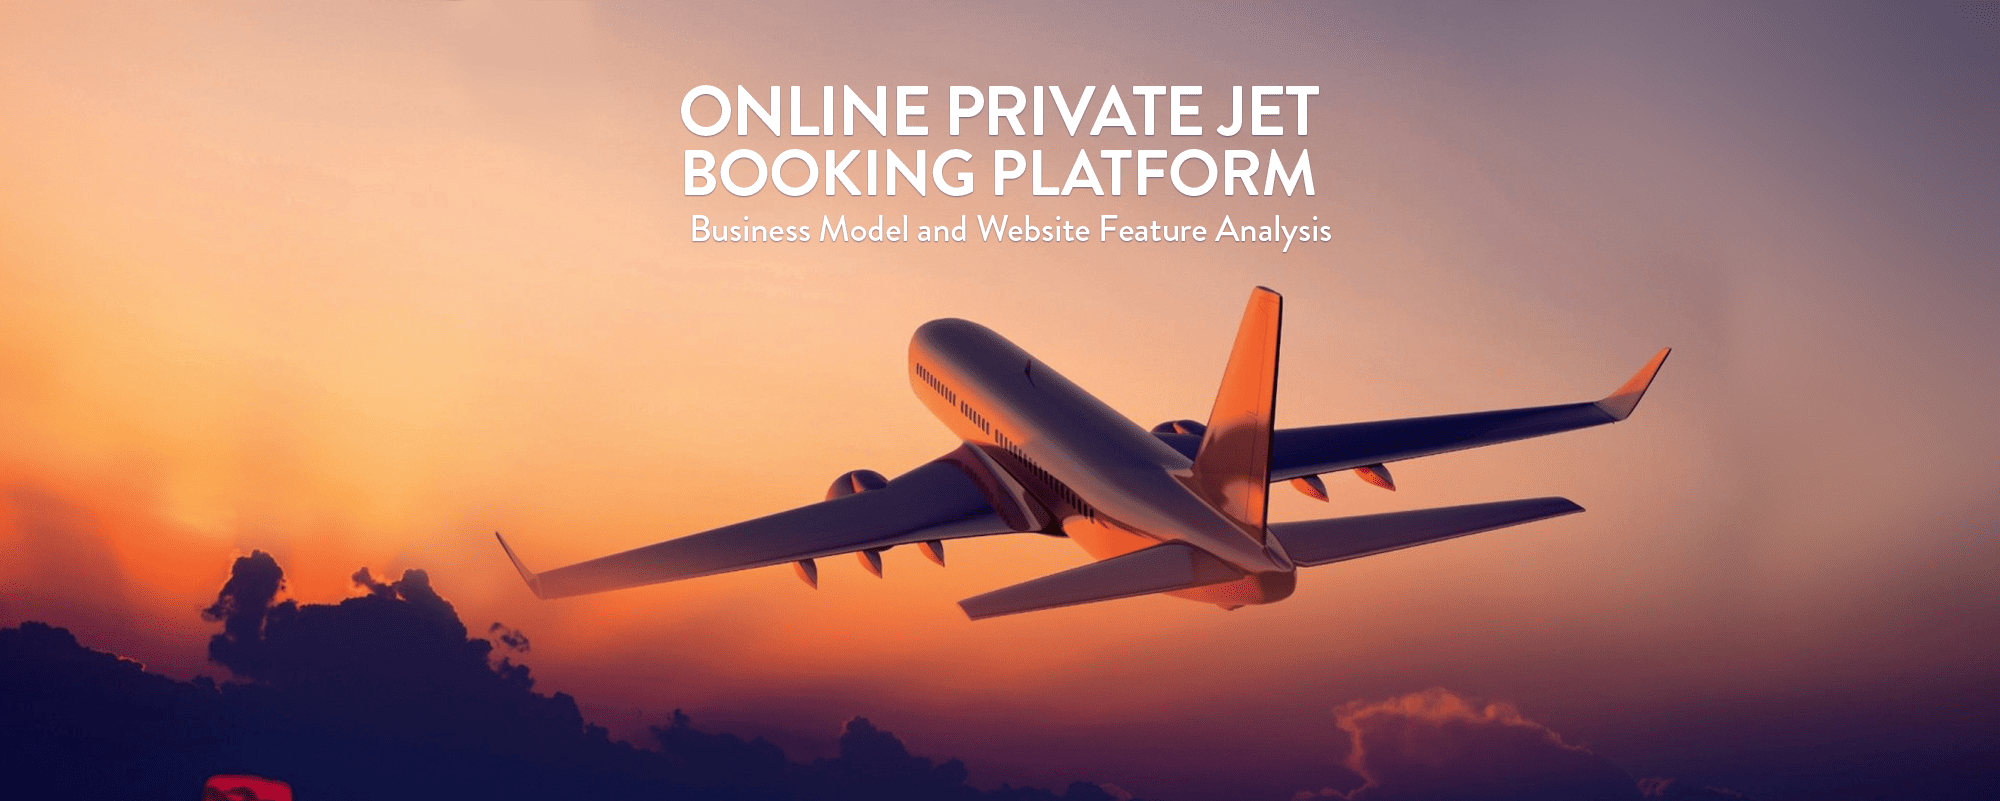 Online Charter Flight Booking Is the Hot New Business Idea – Learn How to Build One